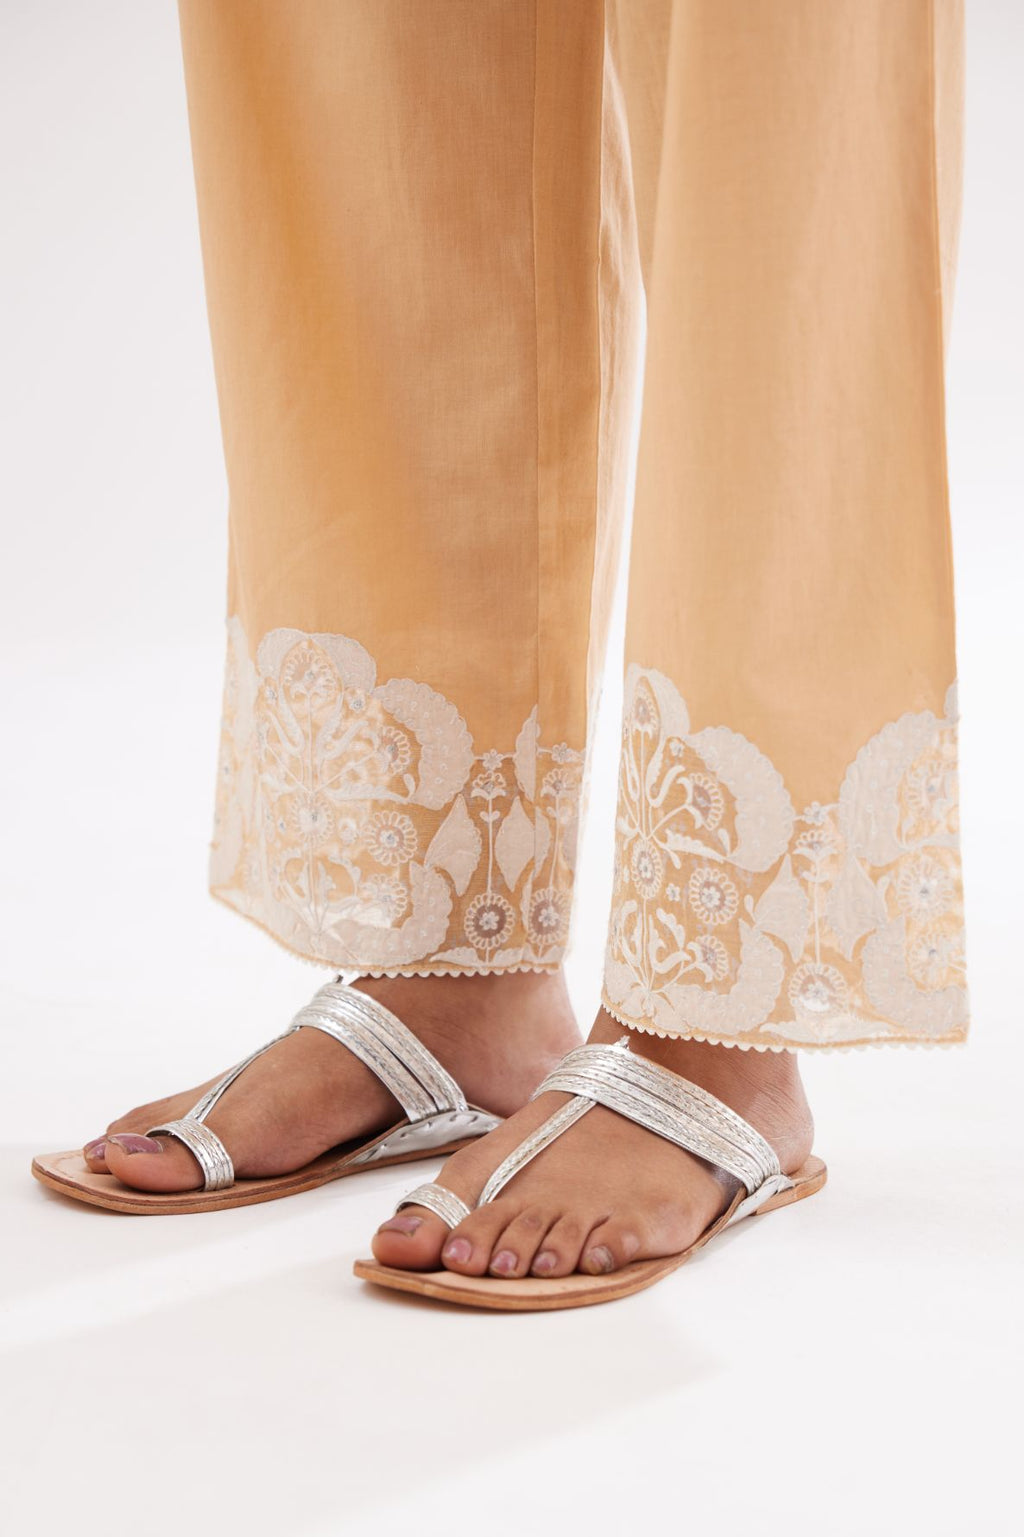 Peach cotton straight pants with appliqué and hand attached sequins detailing at bottom hem.